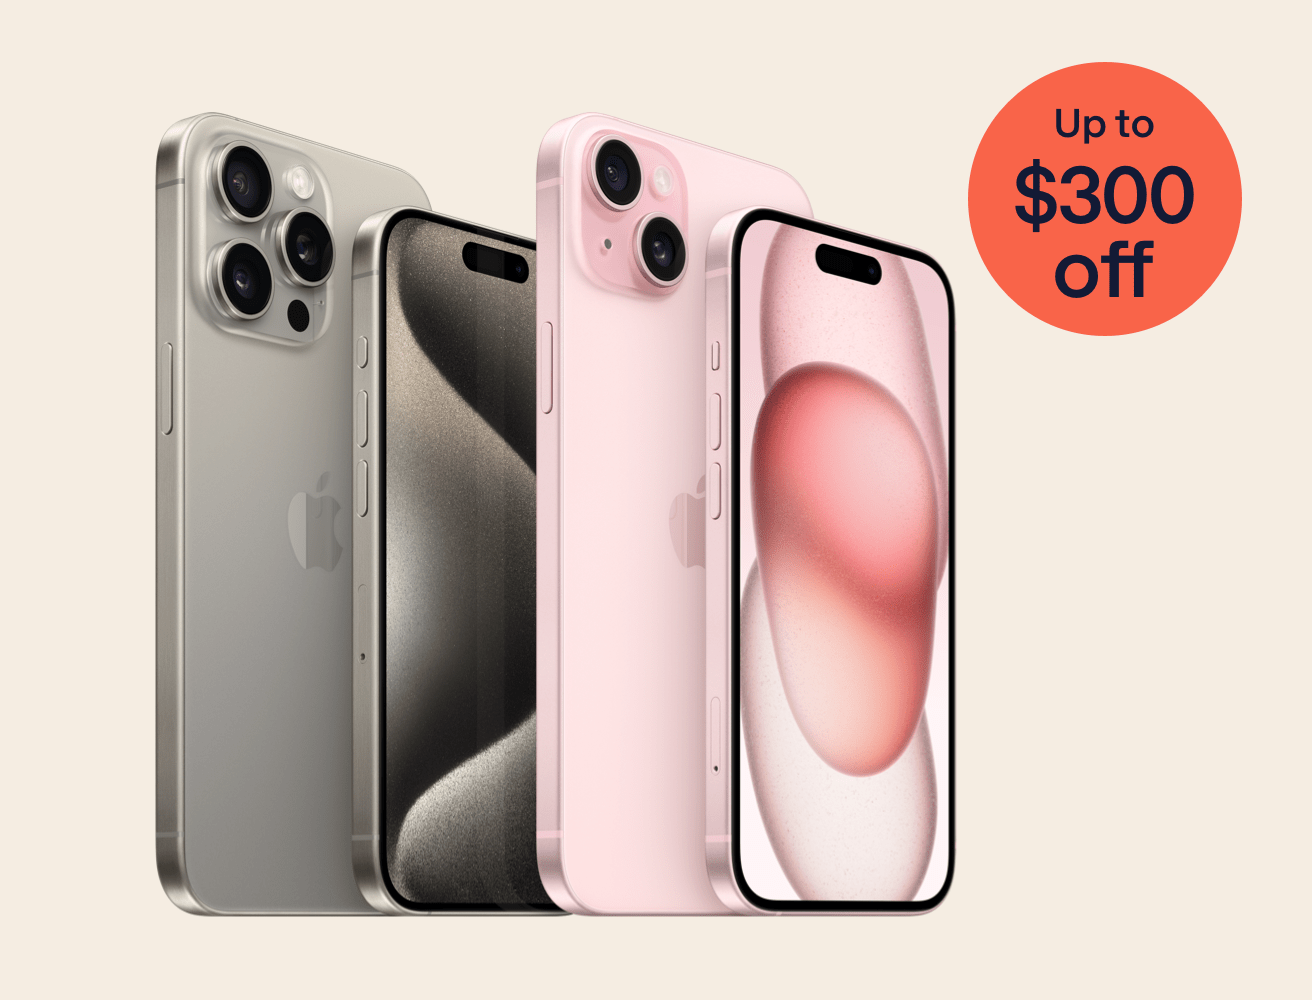 The iPhone 15 Series including the Pro Max and Pro models in Natural Titanium colour, and Plus and iPhone 15 base model in Pink colour. An orange shape next to the phones indicates a discount on the series. Text in orange shape: Up to $300 off.